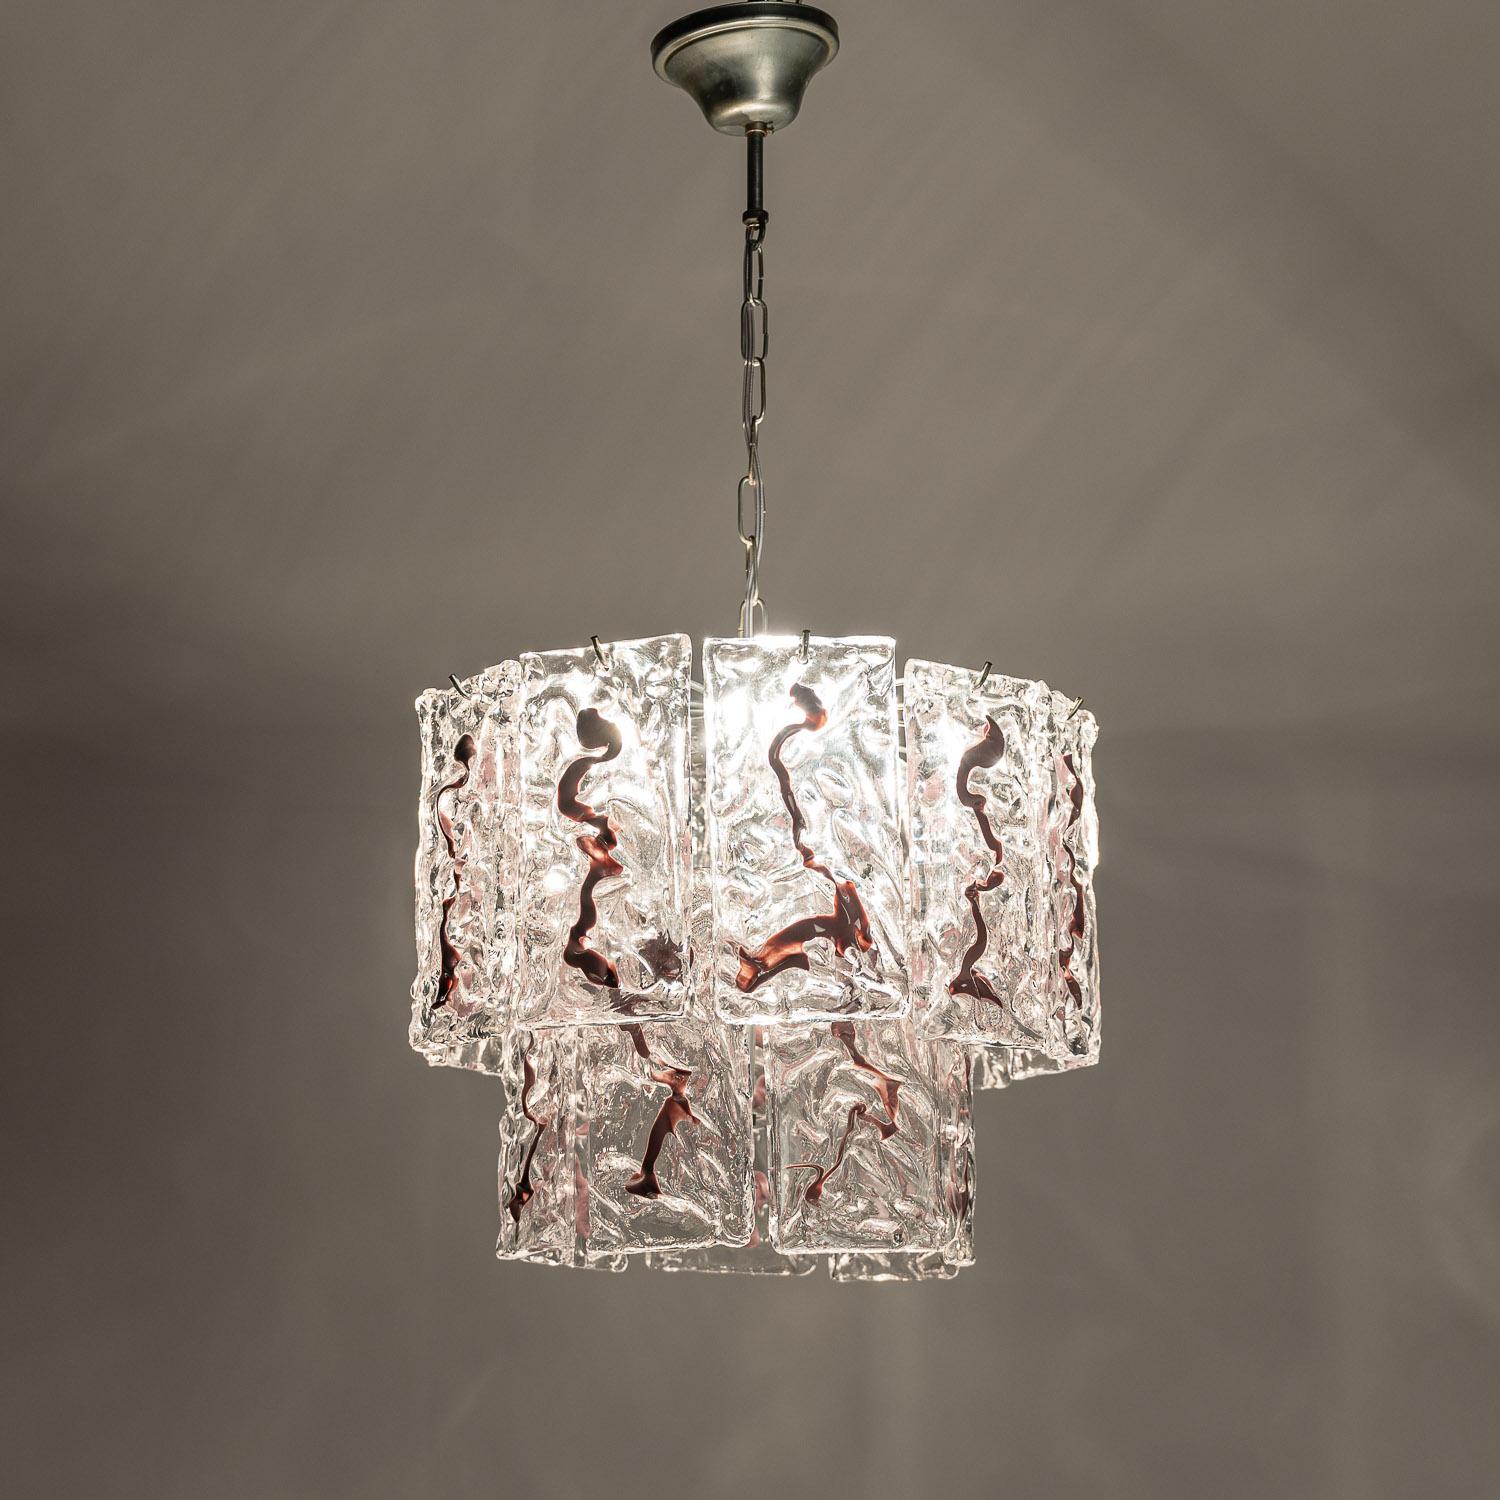 1970's Iron & Glass Chandelier by Vistose For Sale 6